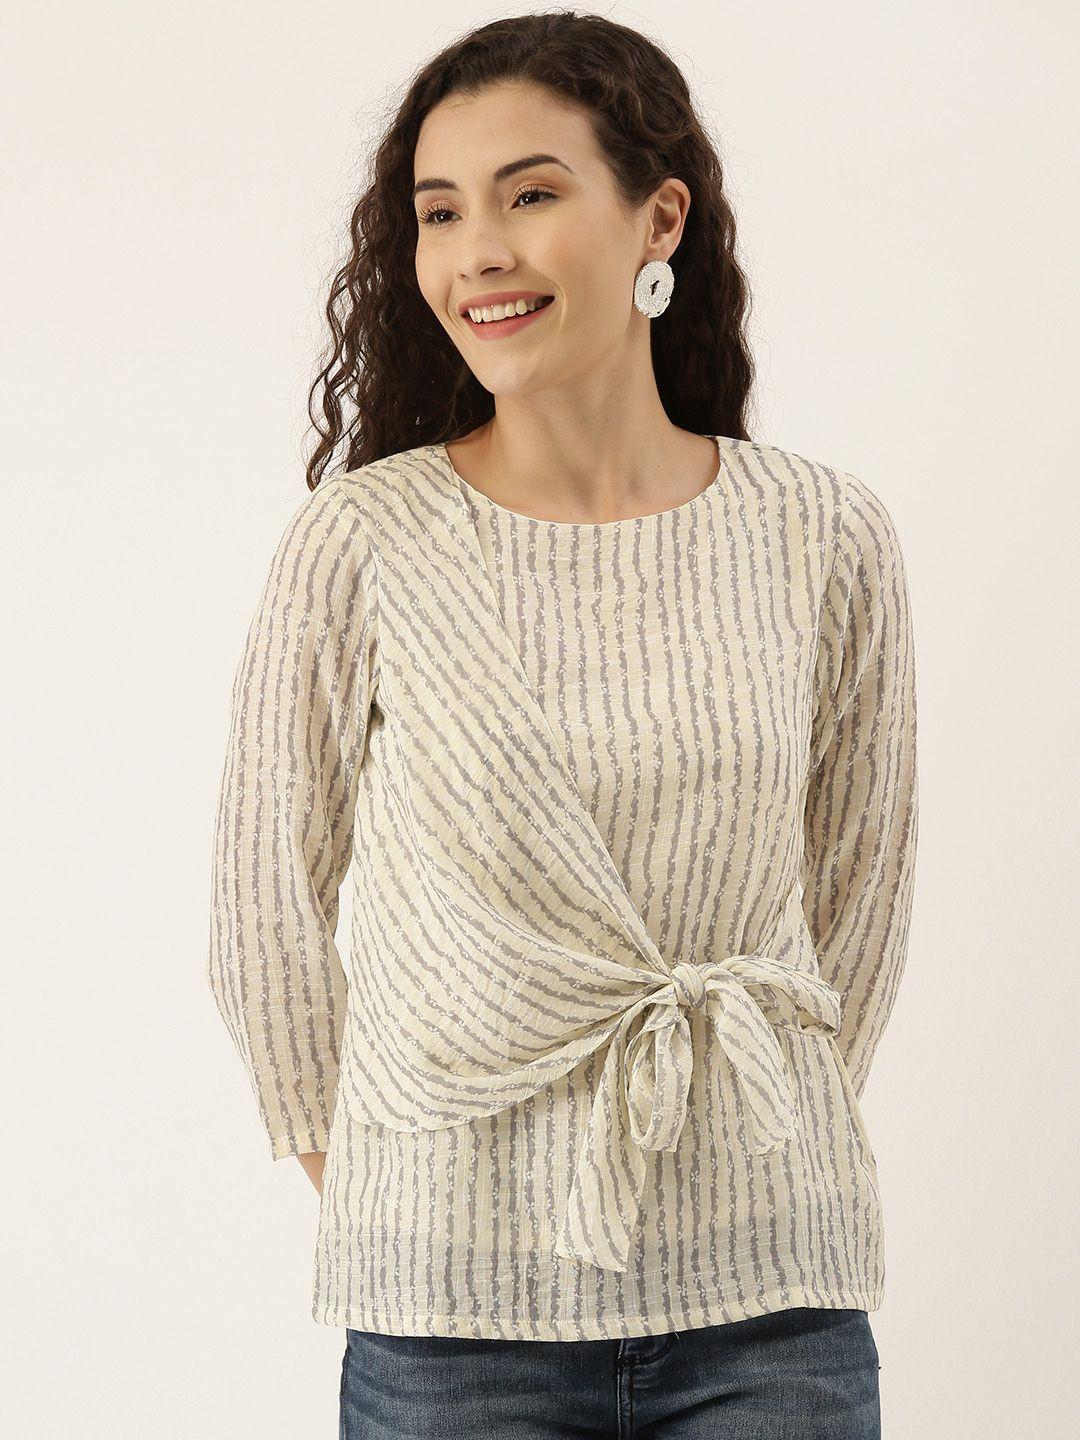 and-women-off-white-striped-top